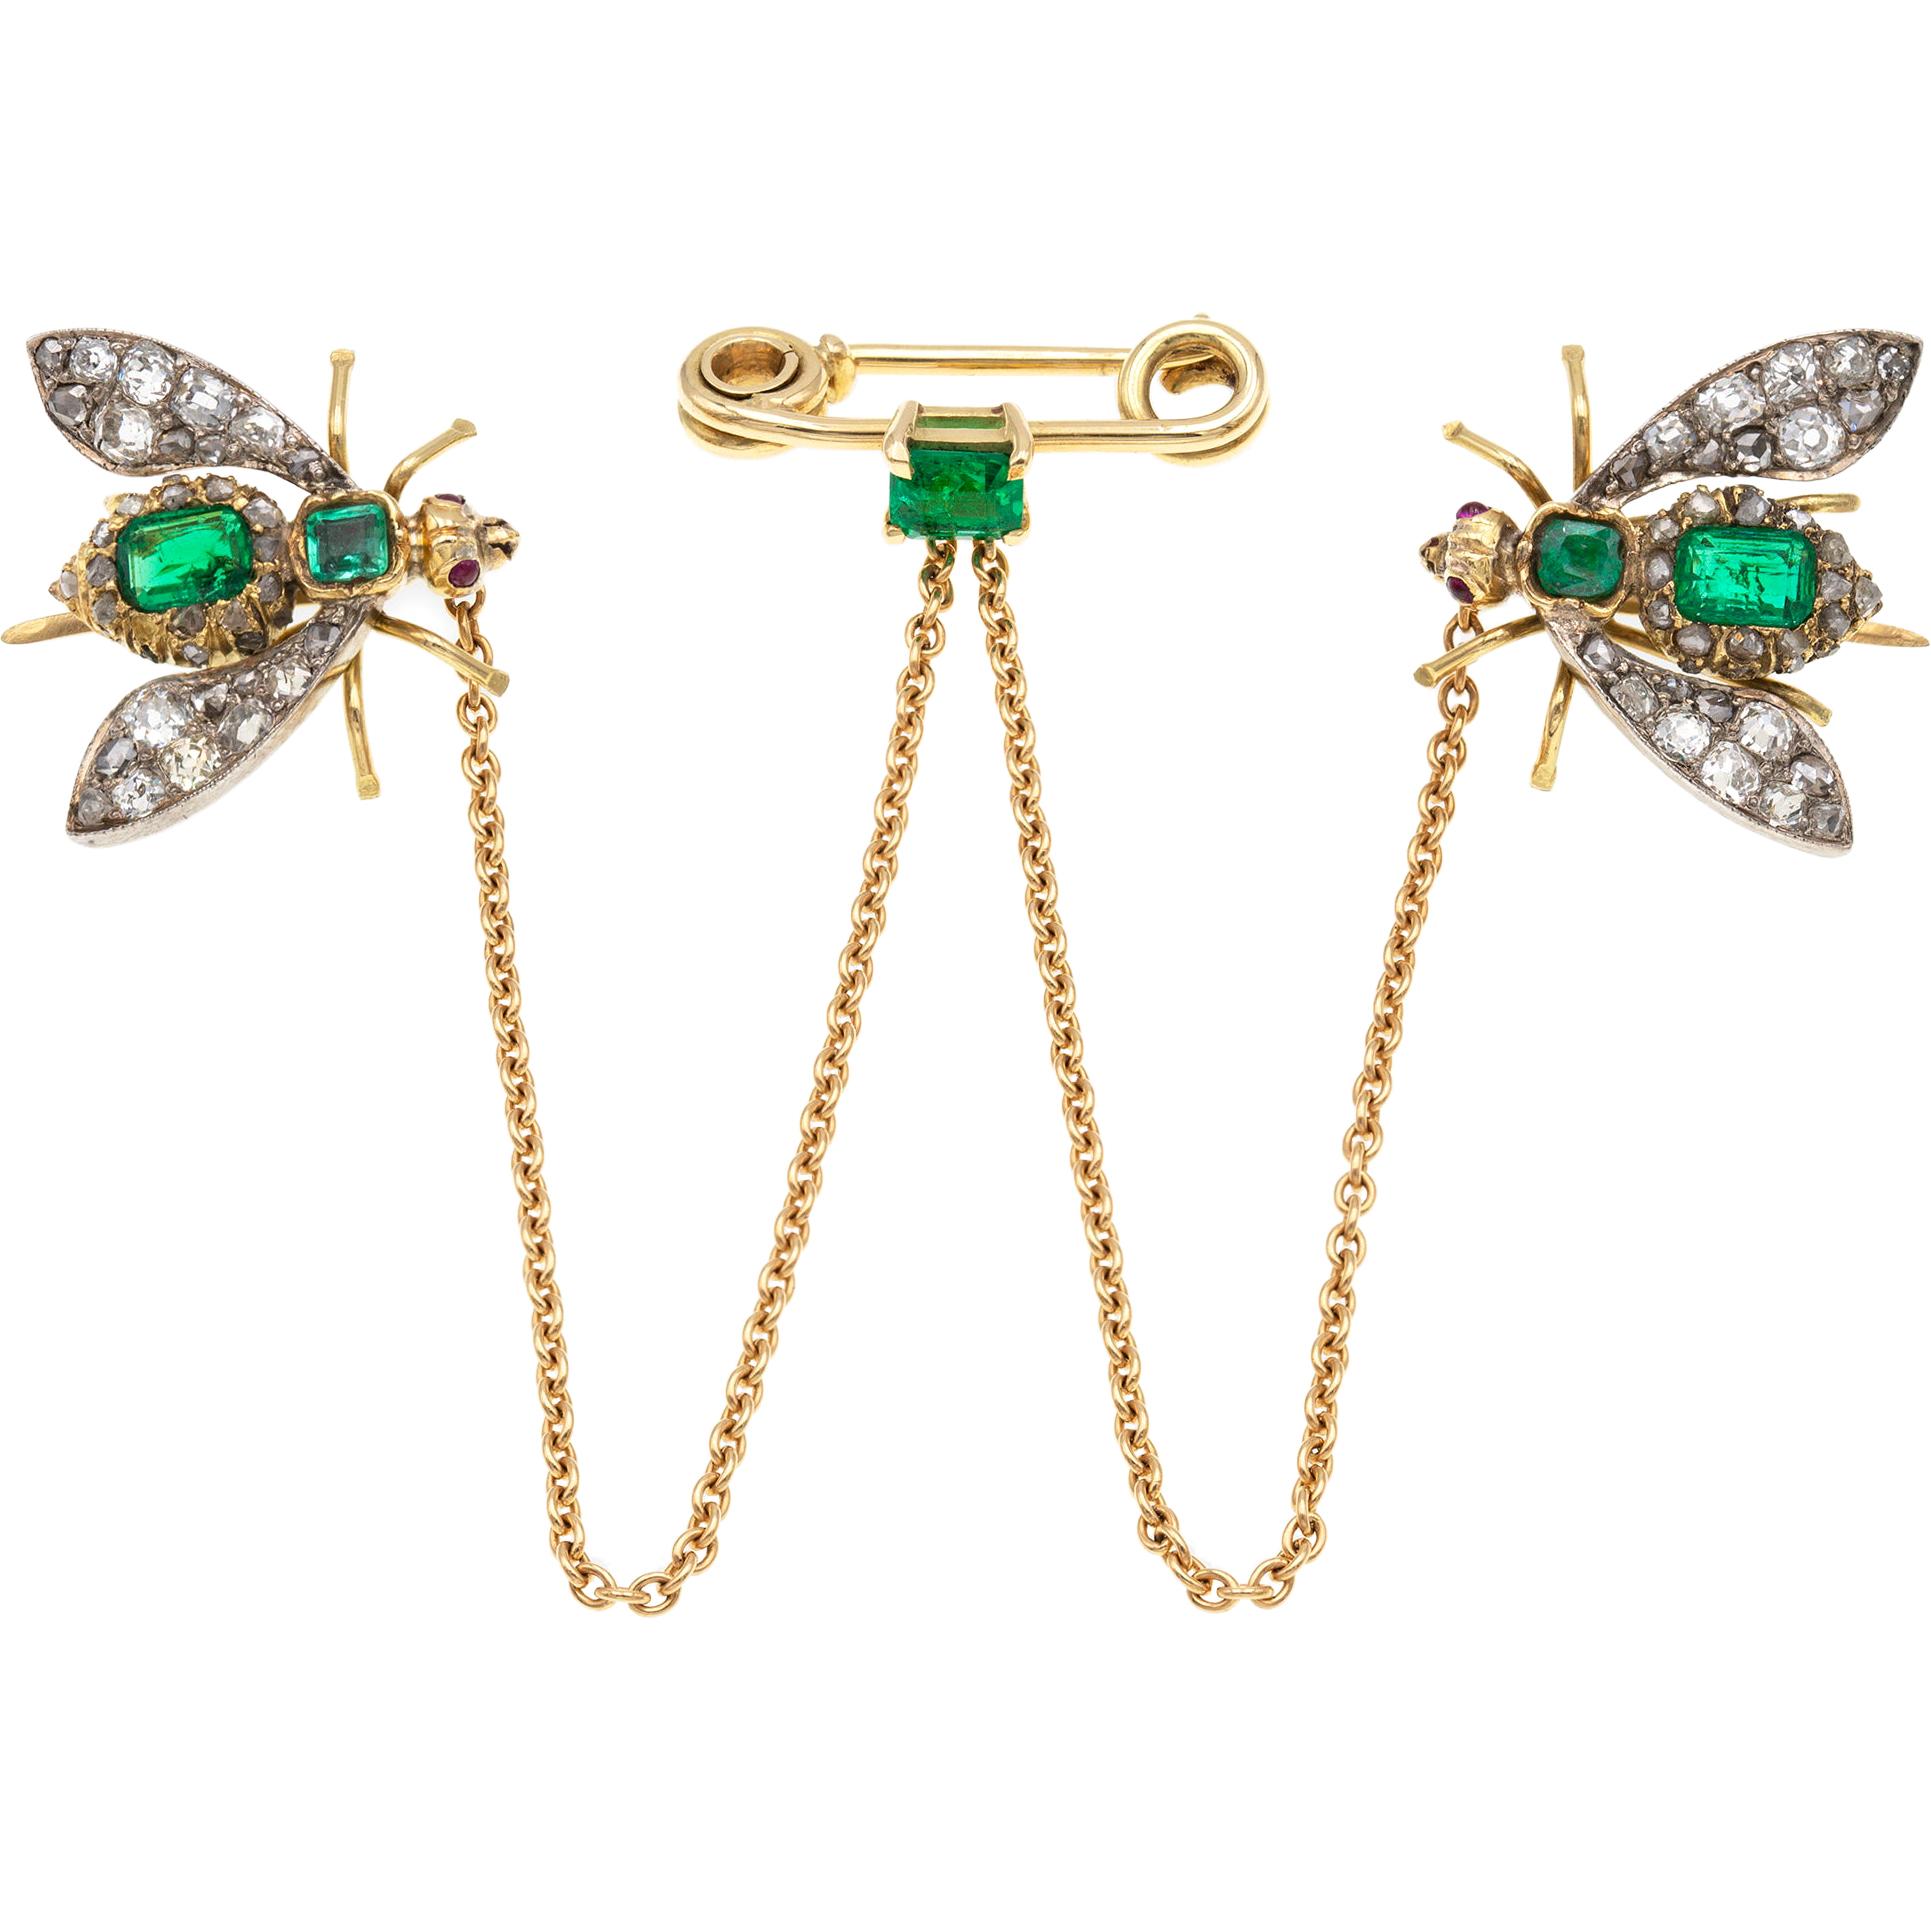 Victorian Emerald and Diamond Fly Scatter-Pin Brooch